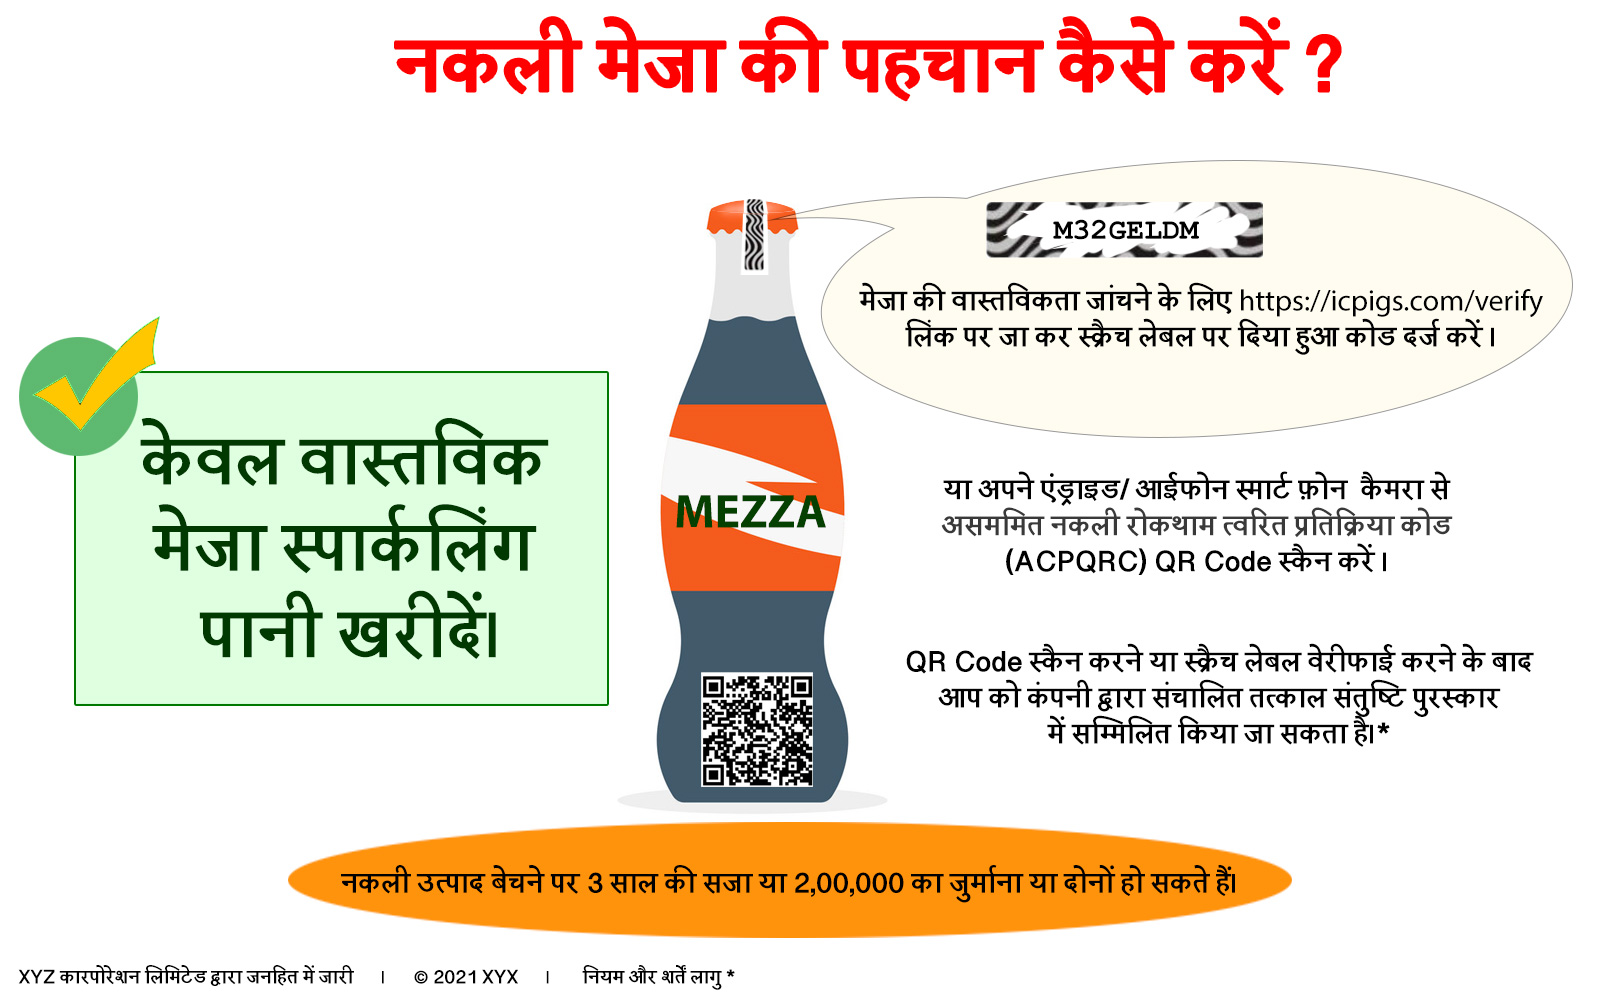 Communication template for identifying counterfeit mezza product by CPIGS technologies.